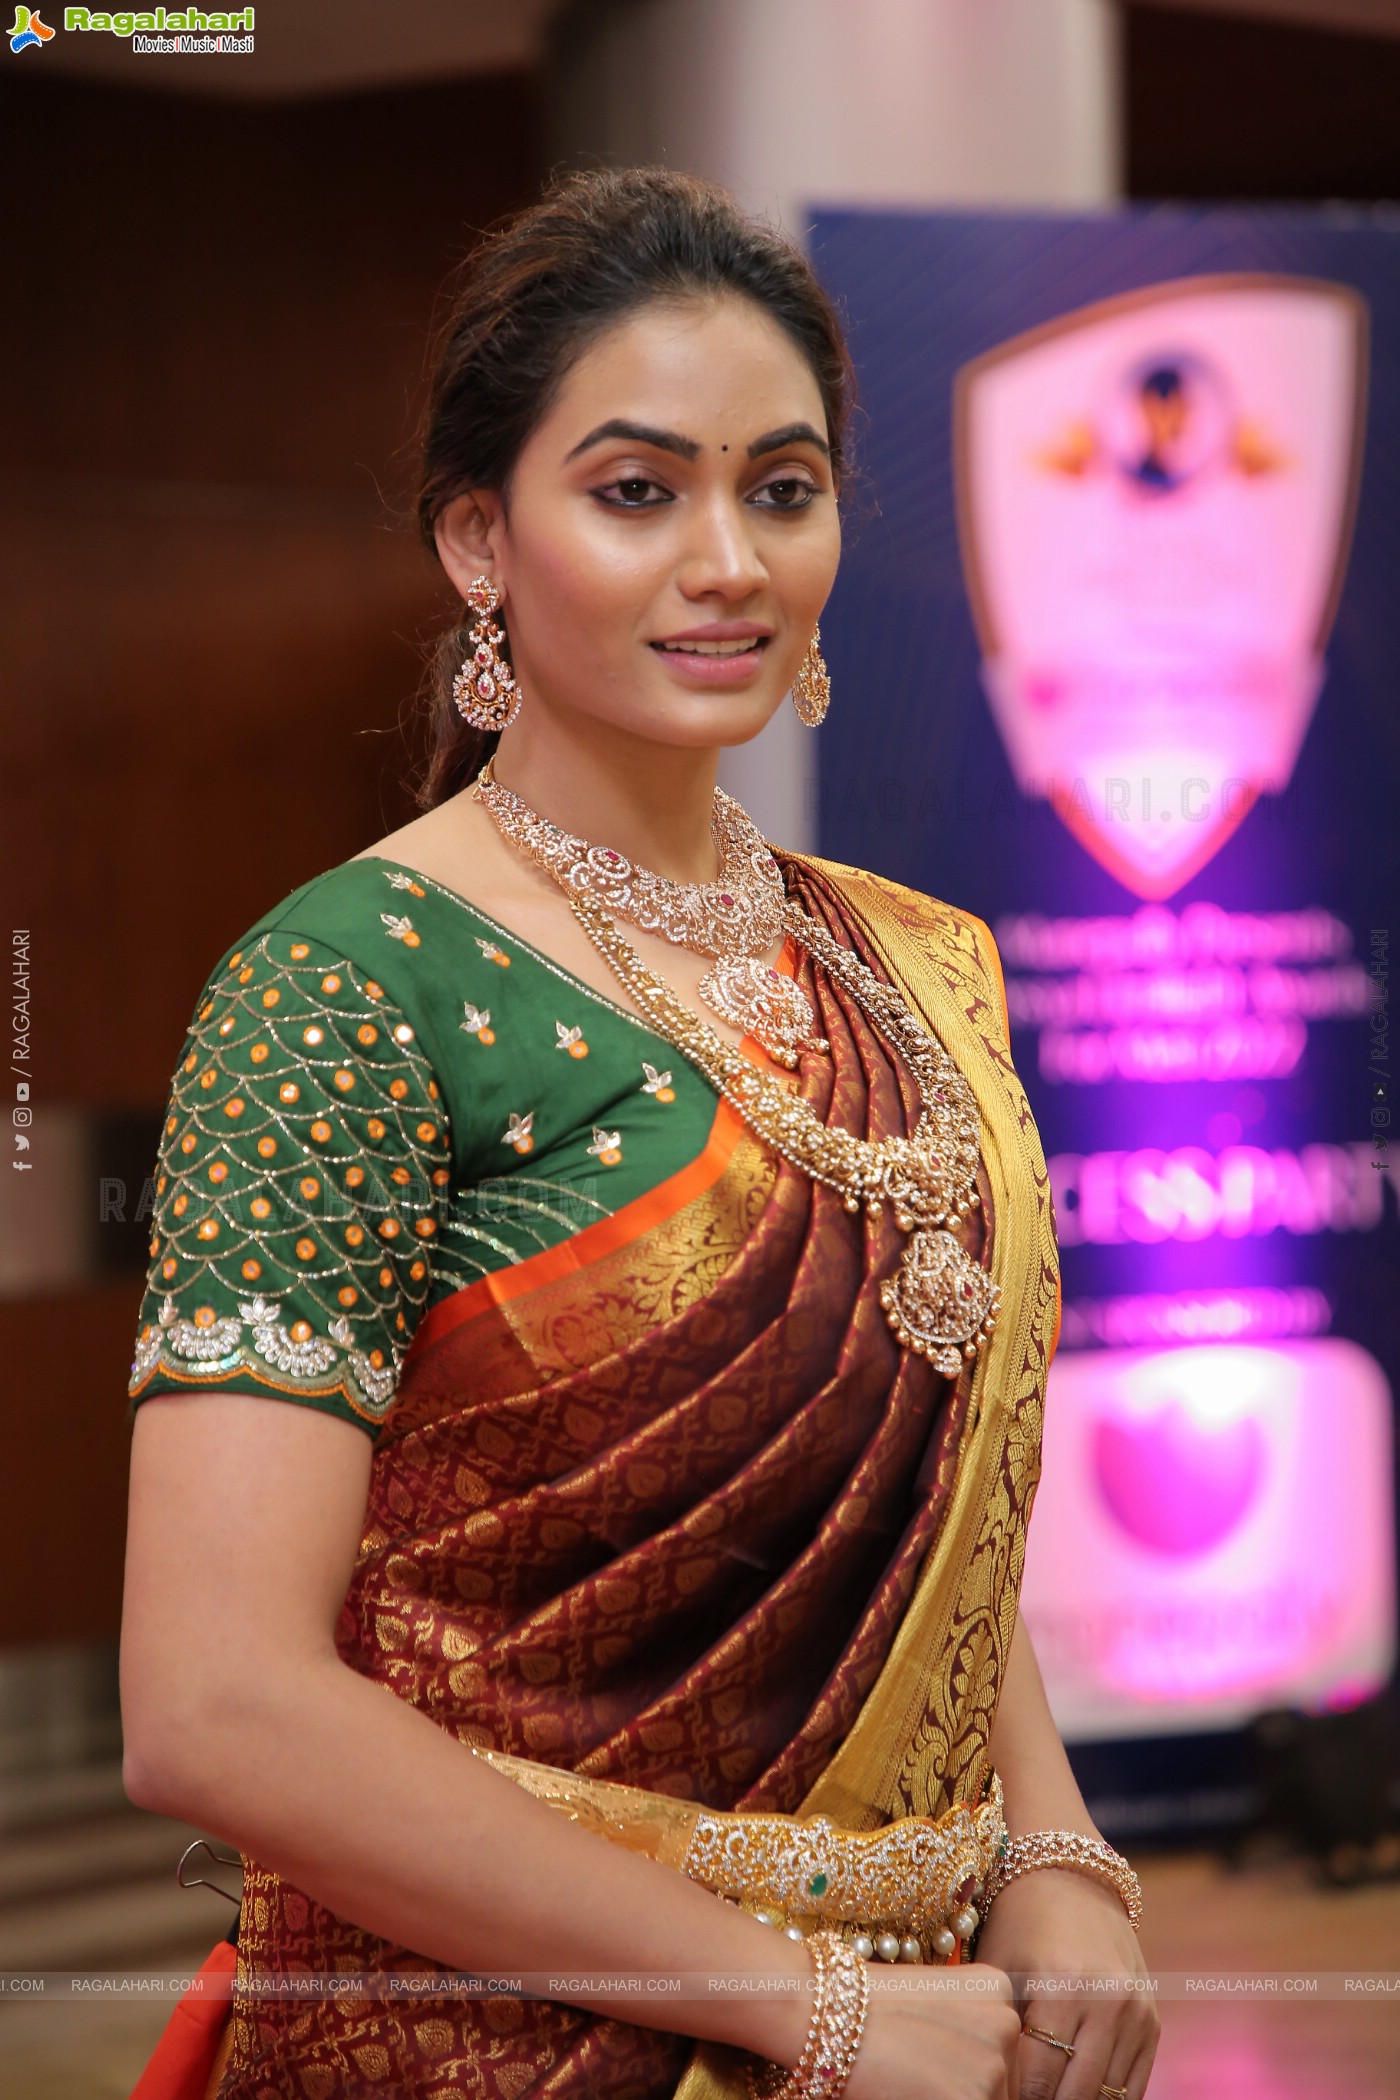 Manepally Jewellers Special Diamond Jewellery Collection Launch at HICC Novotel